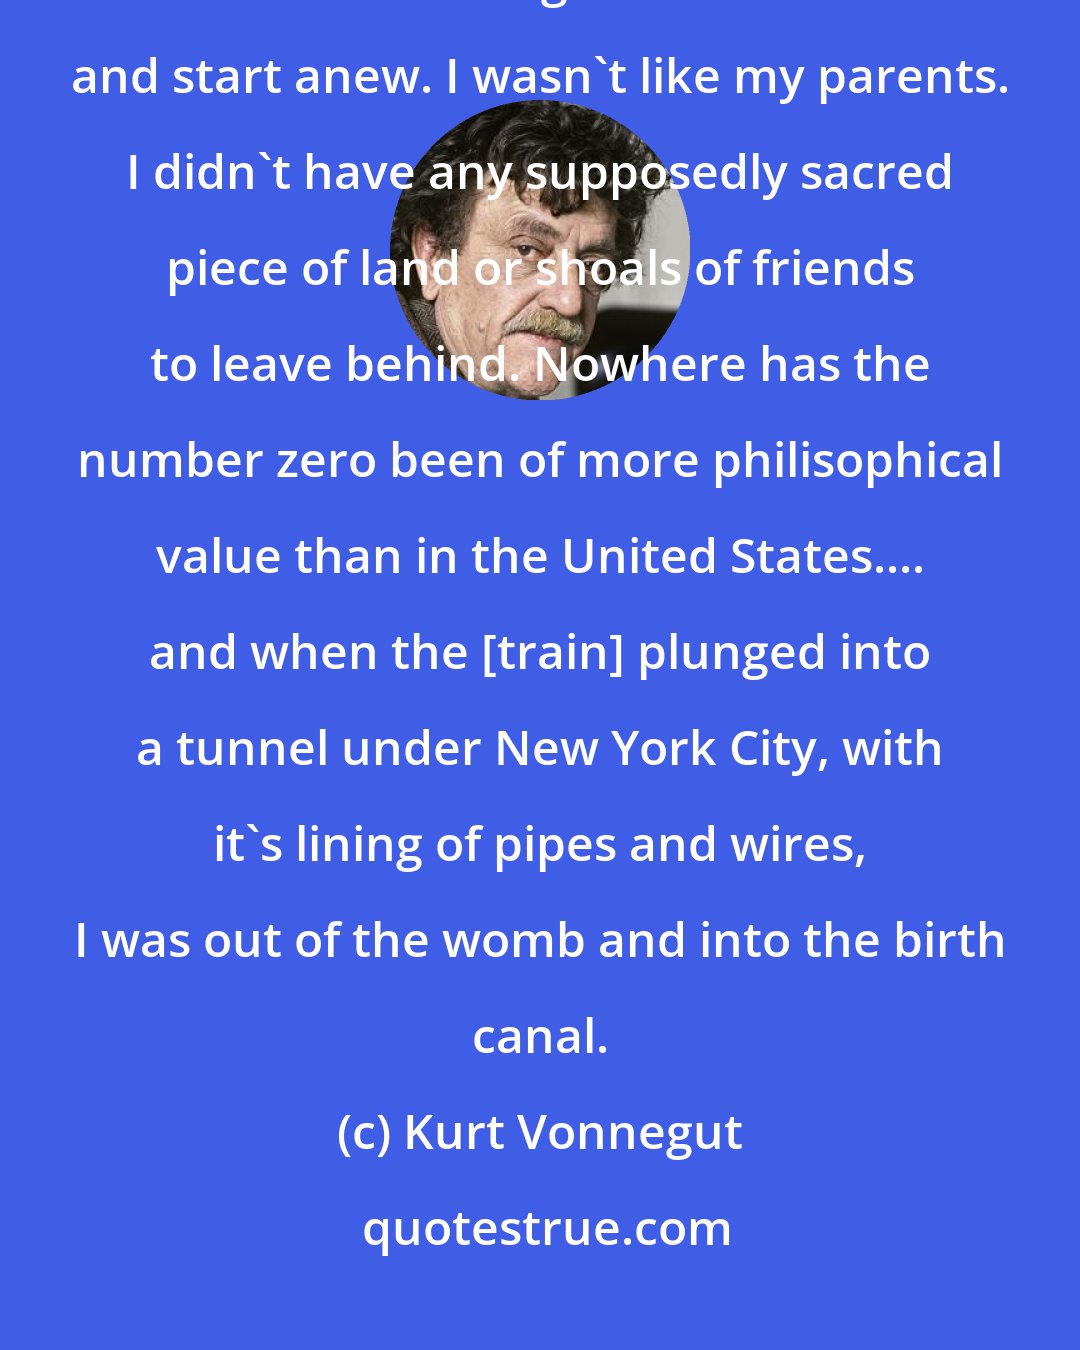 Kurt Vonnegut: So I went to New York City to be born again. It was and remains easy for most Americans to go somewhere else and start anew. I wasn't like my parents. I didn't have any supposedly sacred piece of land or shoals of friends to leave behind. Nowhere has the number zero been of more philisophical value than in the United States.... and when the [train] plunged into a tunnel under New York City, with it's lining of pipes and wires, I was out of the womb and into the birth canal.